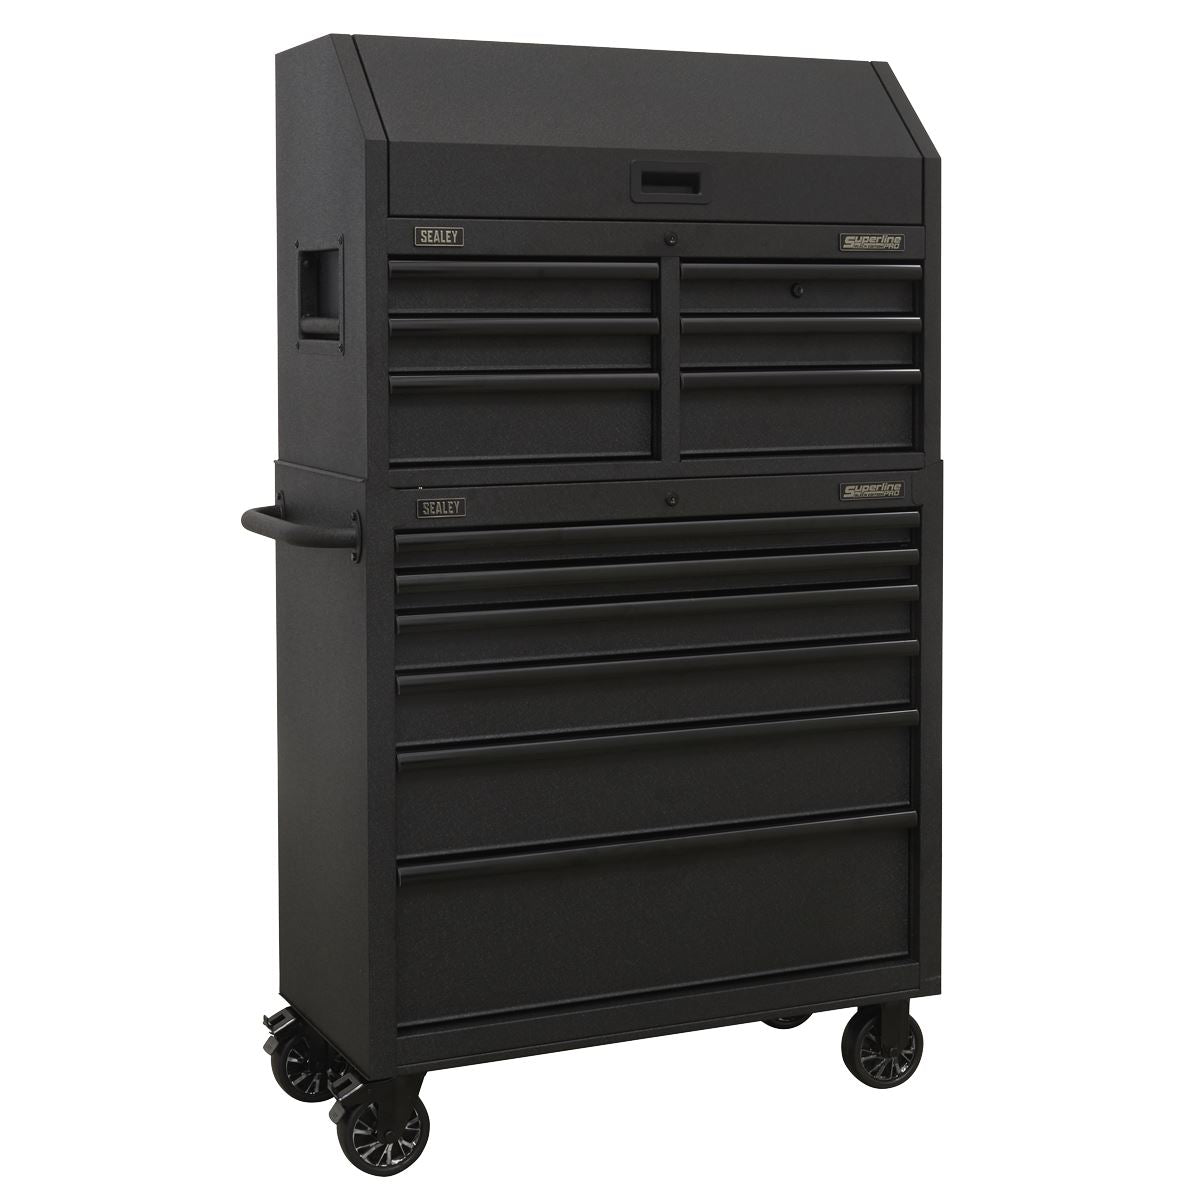 Sealey 12 Drawer Tool Chest Combination with Power Bar AP36BESTACK